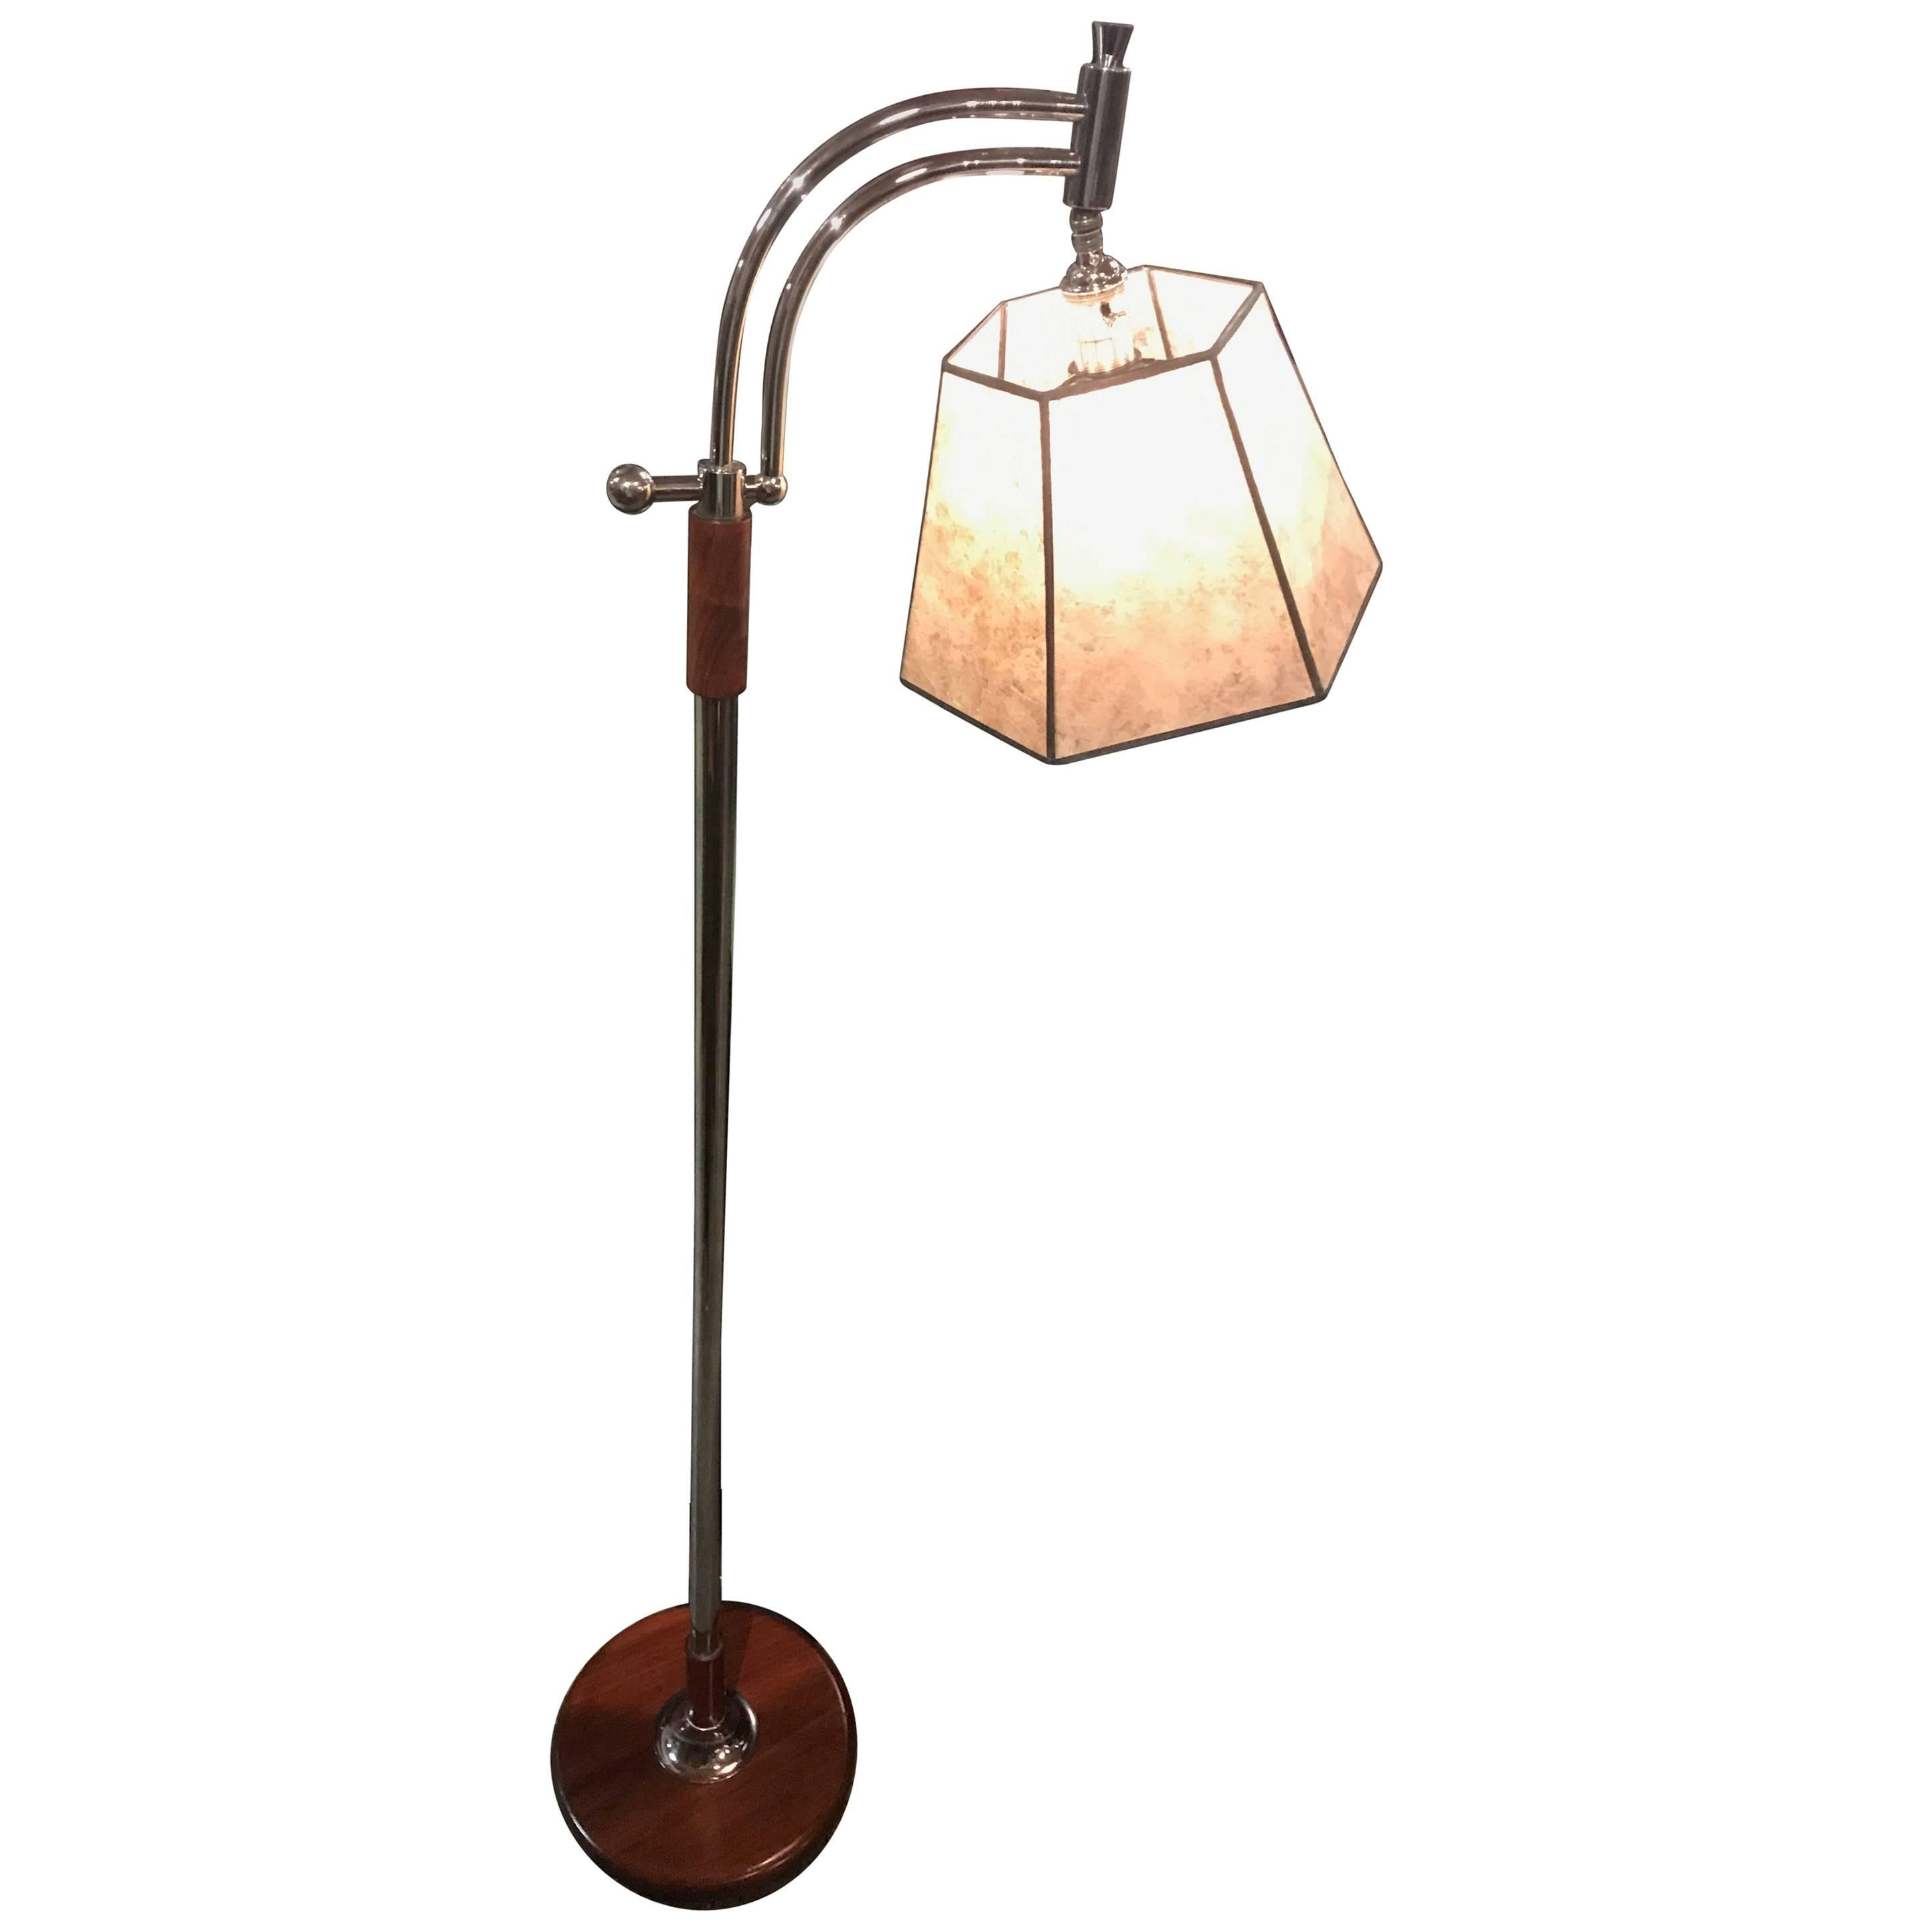 Bridge Floor Lamp with Mica Shade in the Style of Deskey or Rohde